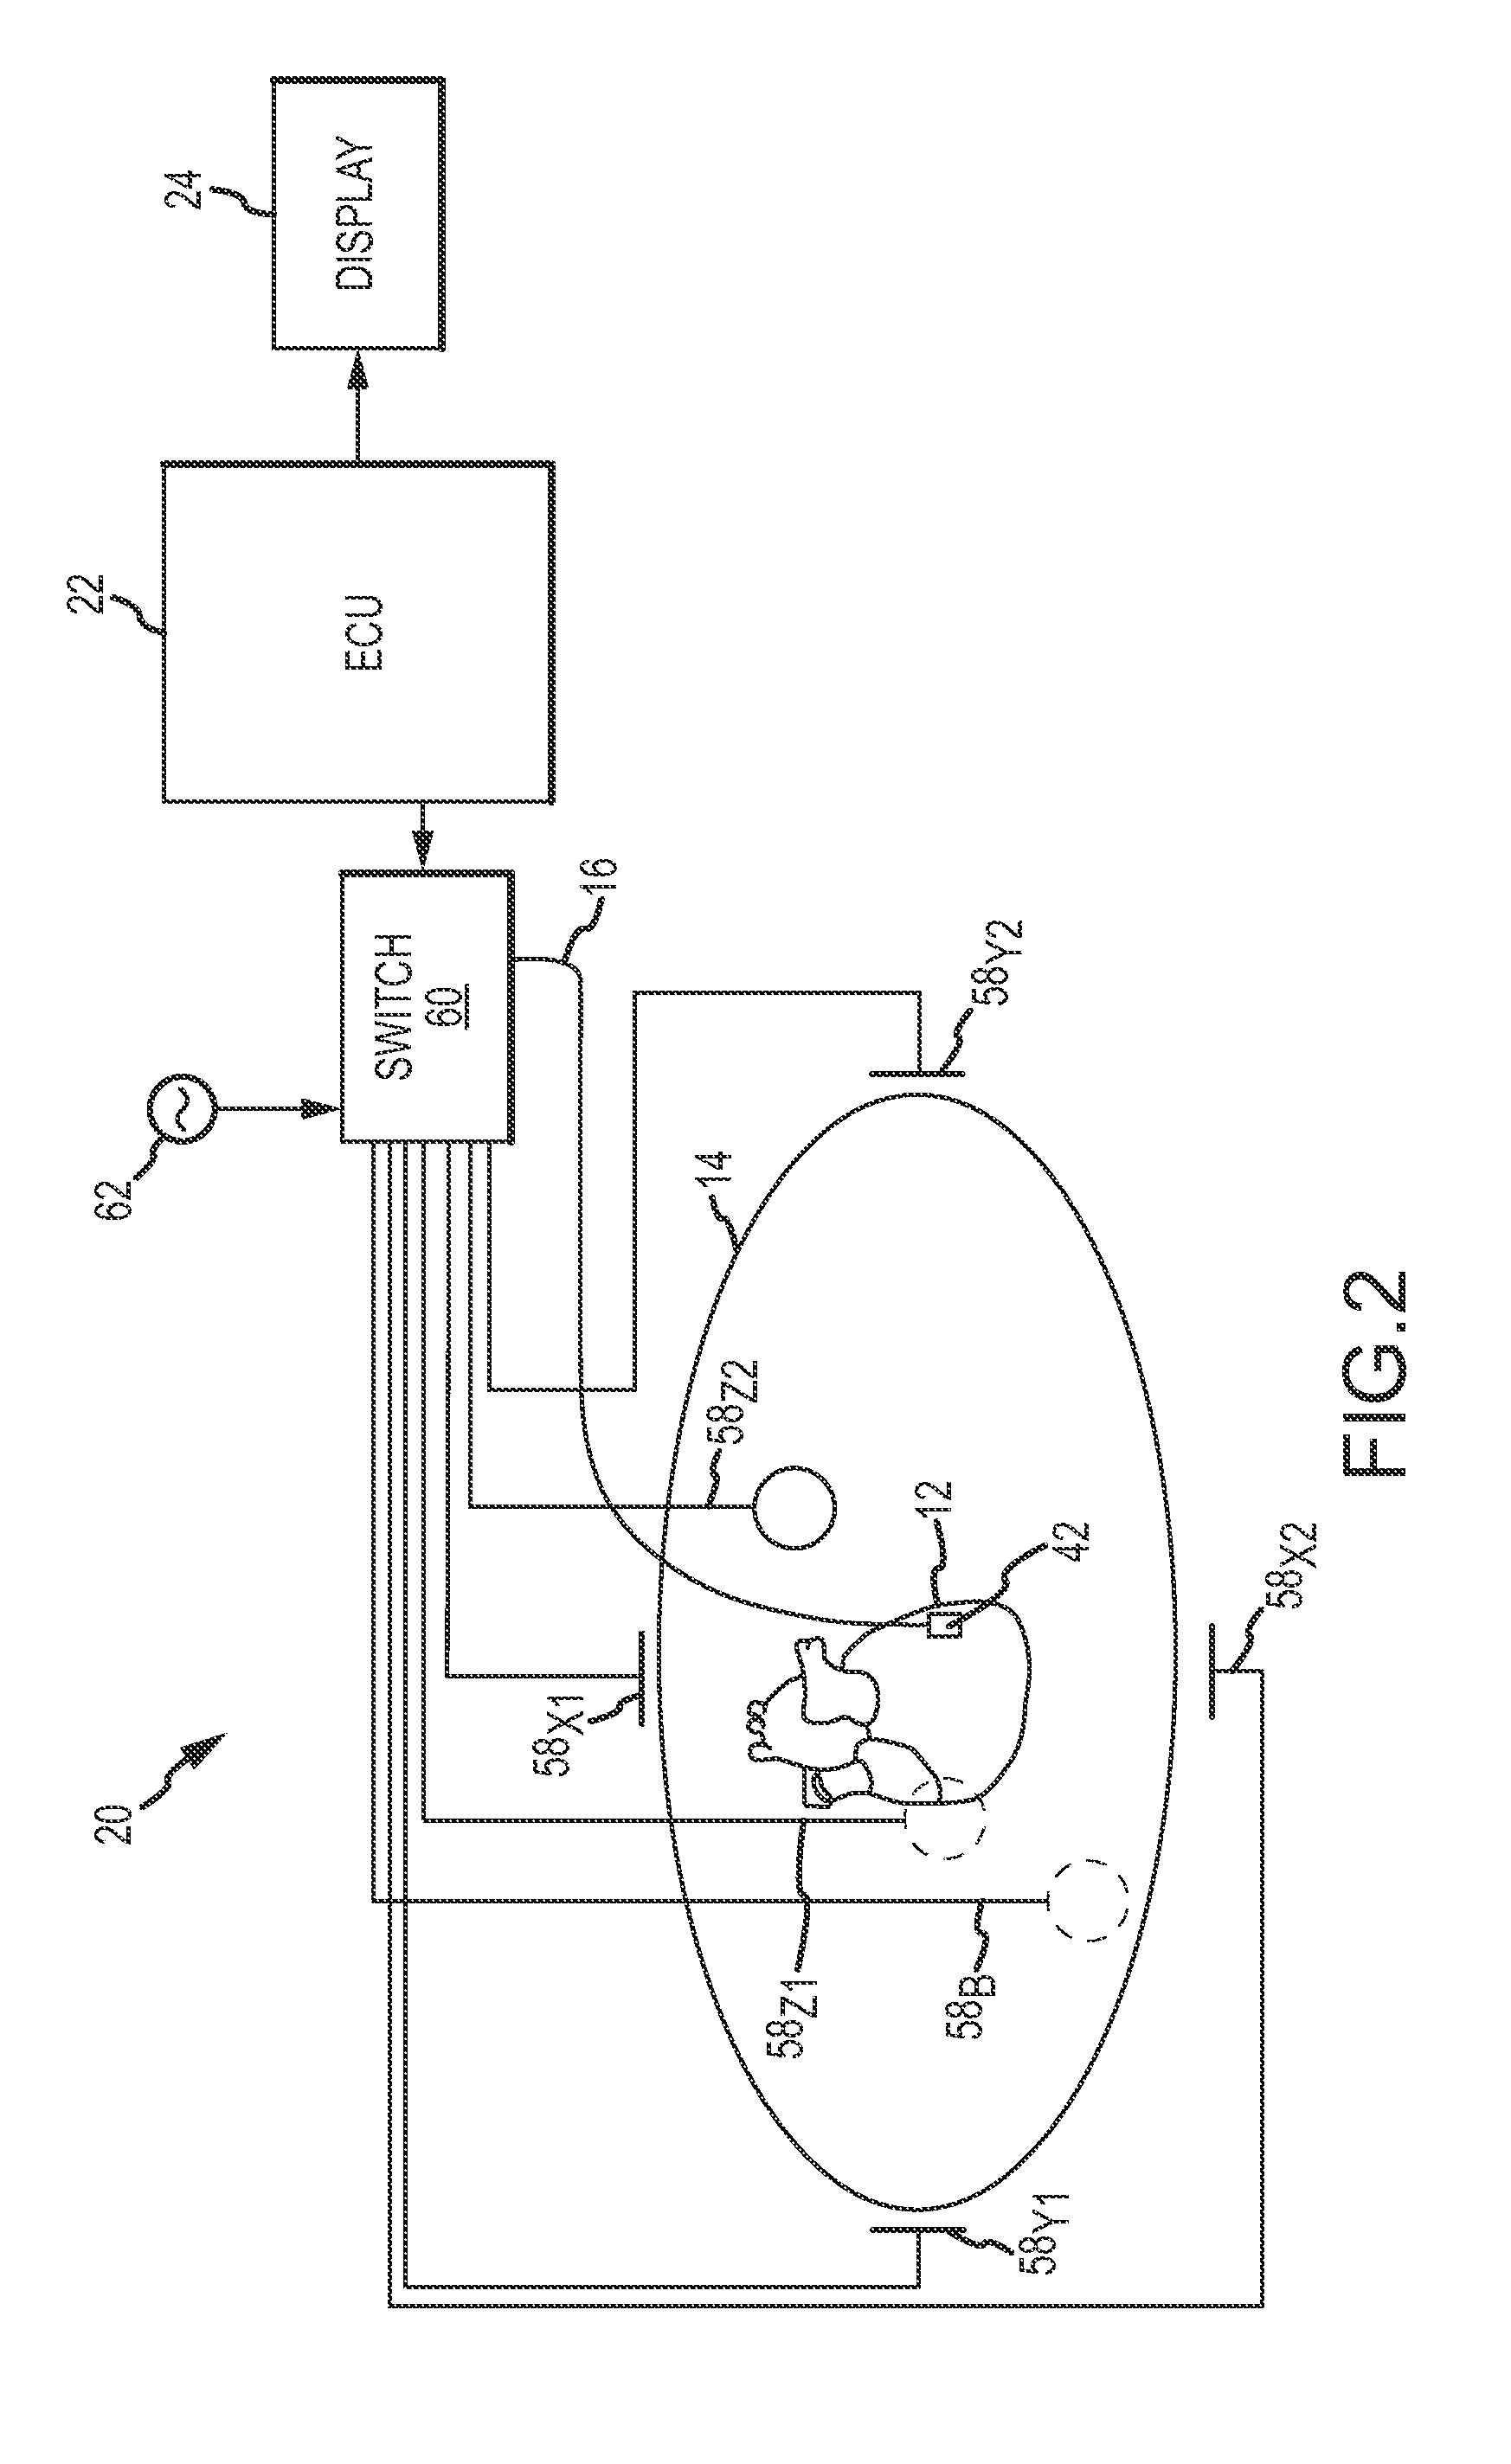 System and method for presenting information representative of lesion formation in tissue during an ablation procedure